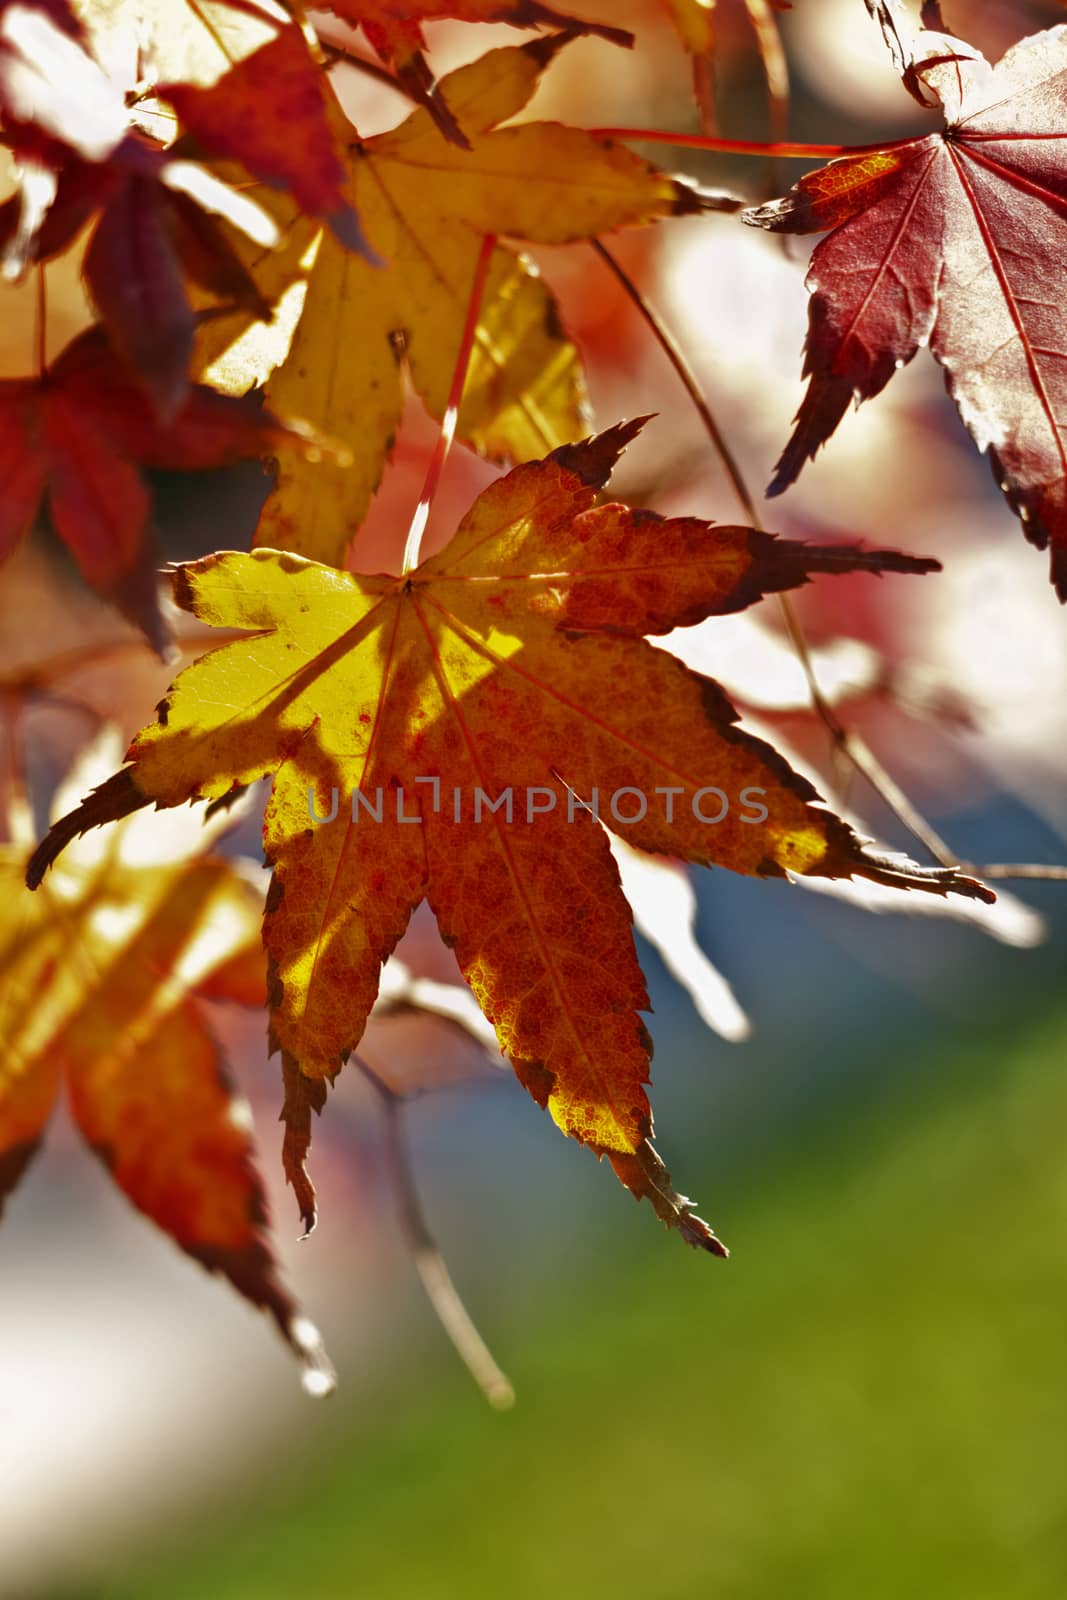 Several leaves of a japanese maple-acer palmatum - tree, bright orange yellow  leaves  backlighted ,leaves with seven acutely pointed lobes with serrated margins,  vertical composition 